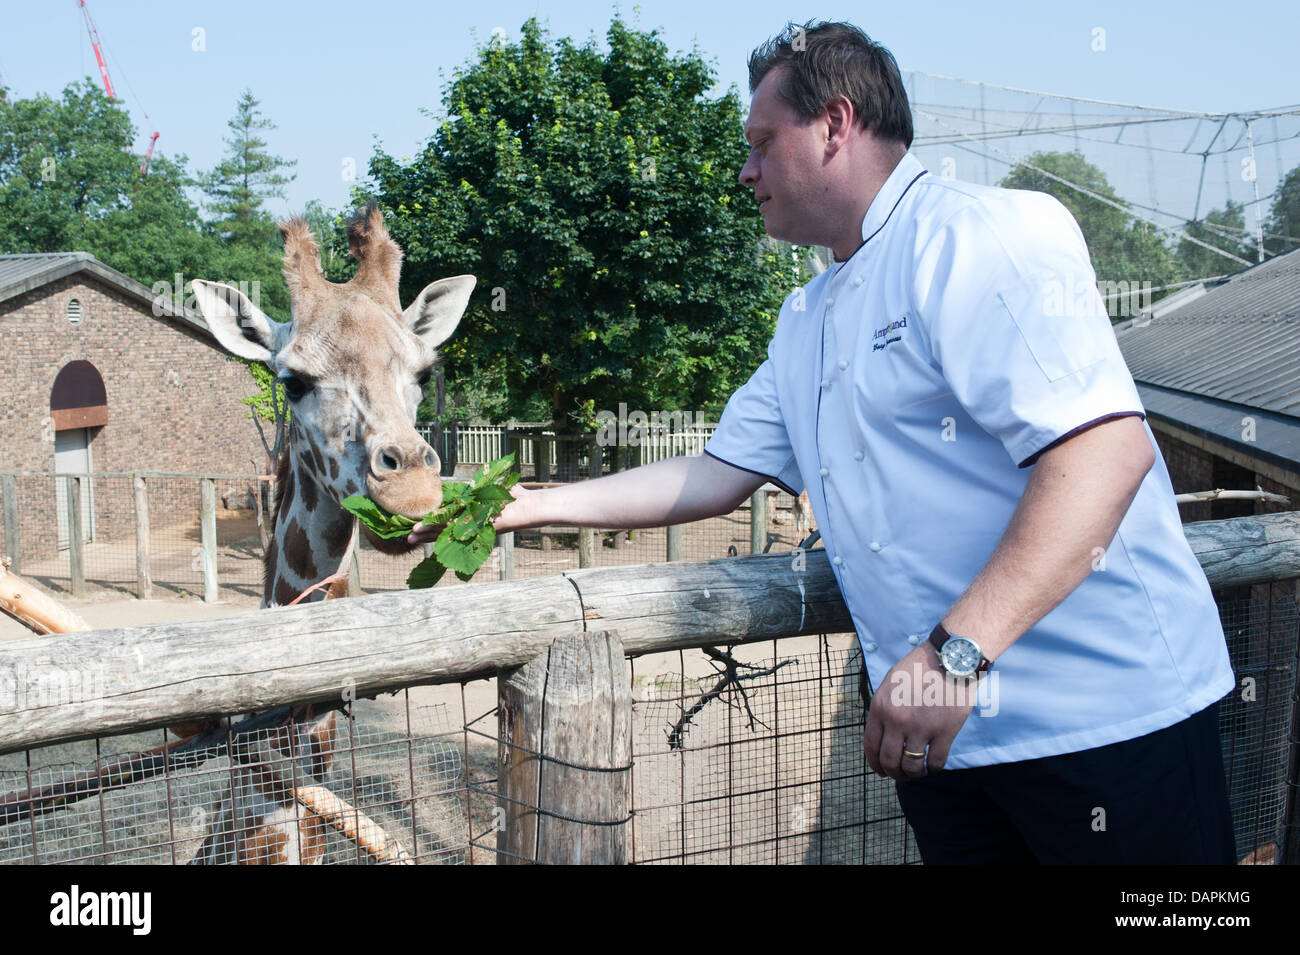 London, UK. 17th July, 2013. Giraffes at ZSL London Zoo experience silver service with a difference ahead of the opening of brand-new The Terrace Restaurant next Friday. Gary Devereaux, executive chef for the Zoo’s caterers Ampersand, serves up custom dishes to get the animals’ seal of approval before The Terrace Restaurant opens its doors to Zoo visitors. Credit:  Piero Cruciatti/Alamy Live News Stock Photo